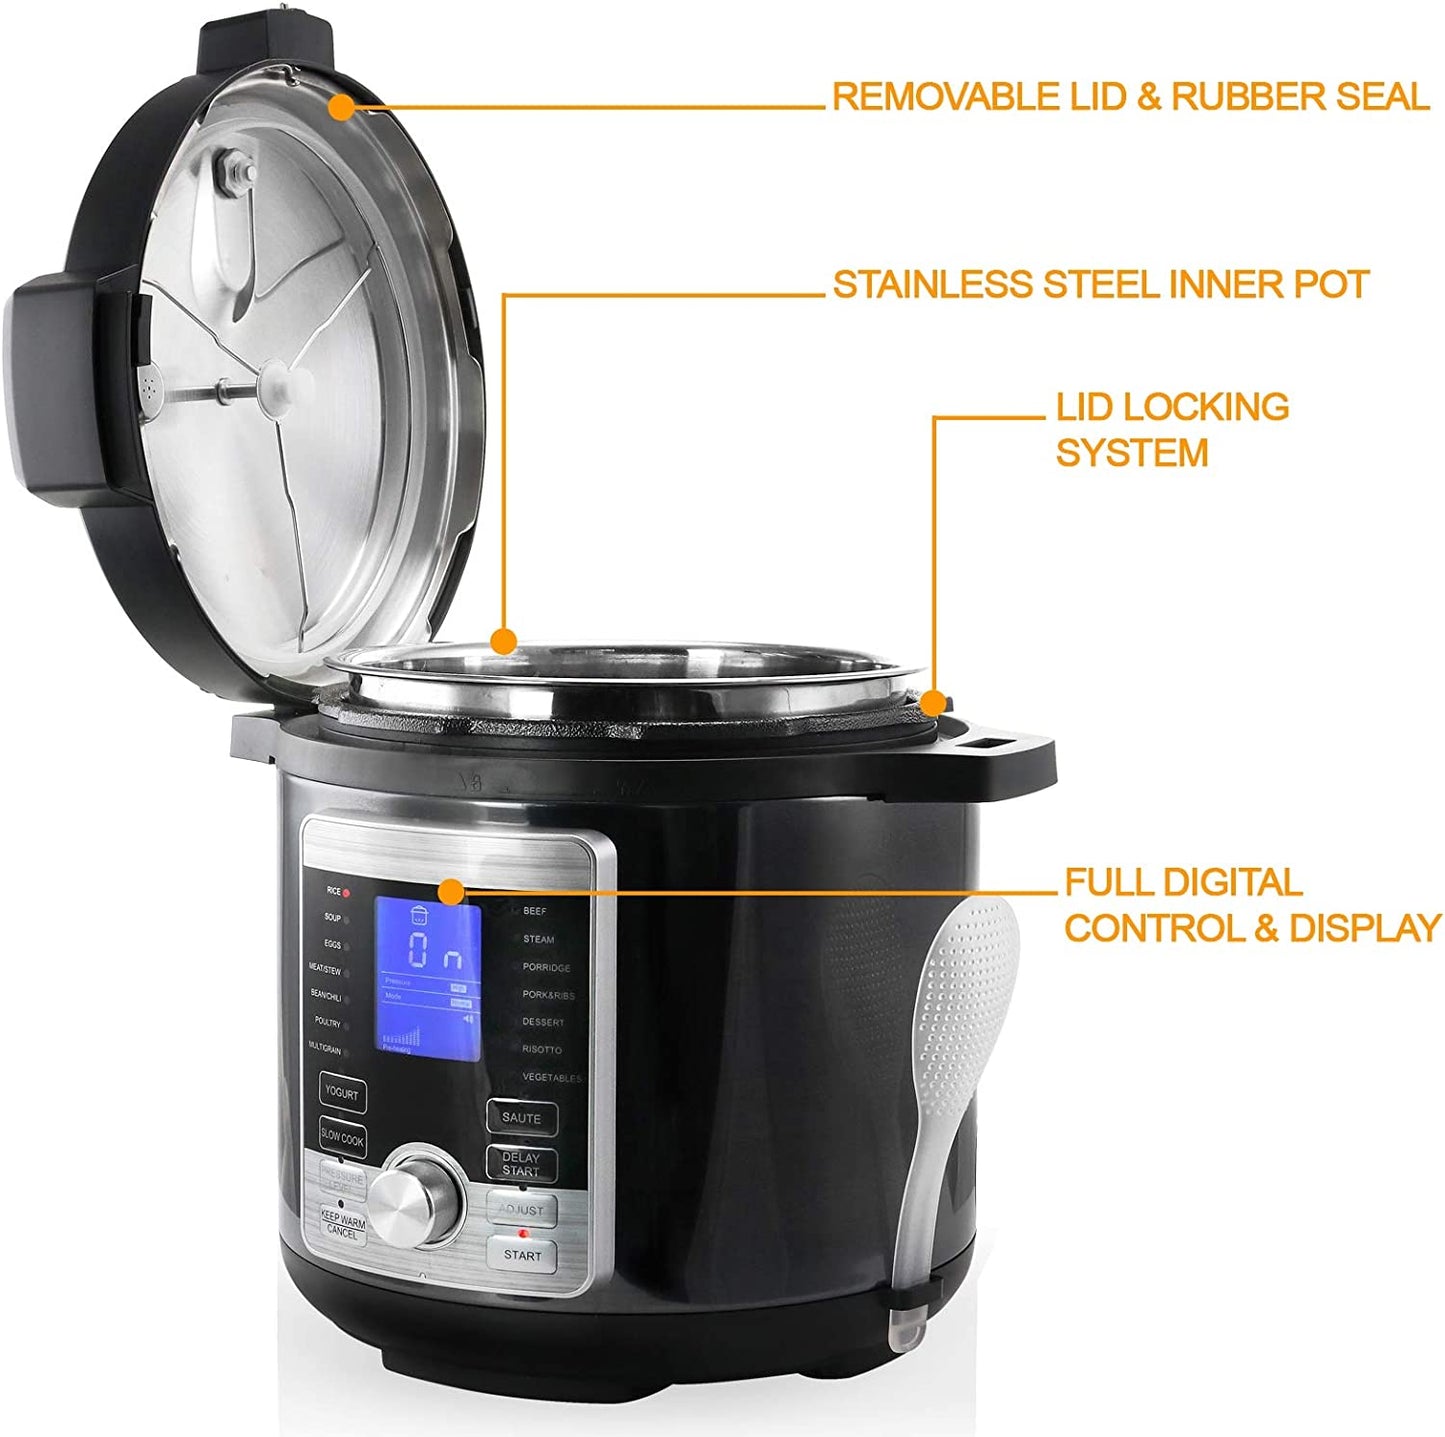 Megachef Electric Stainless Steel Brushed Digital Pressure Cooker with Lid, 6 Quart, Chrome and Black